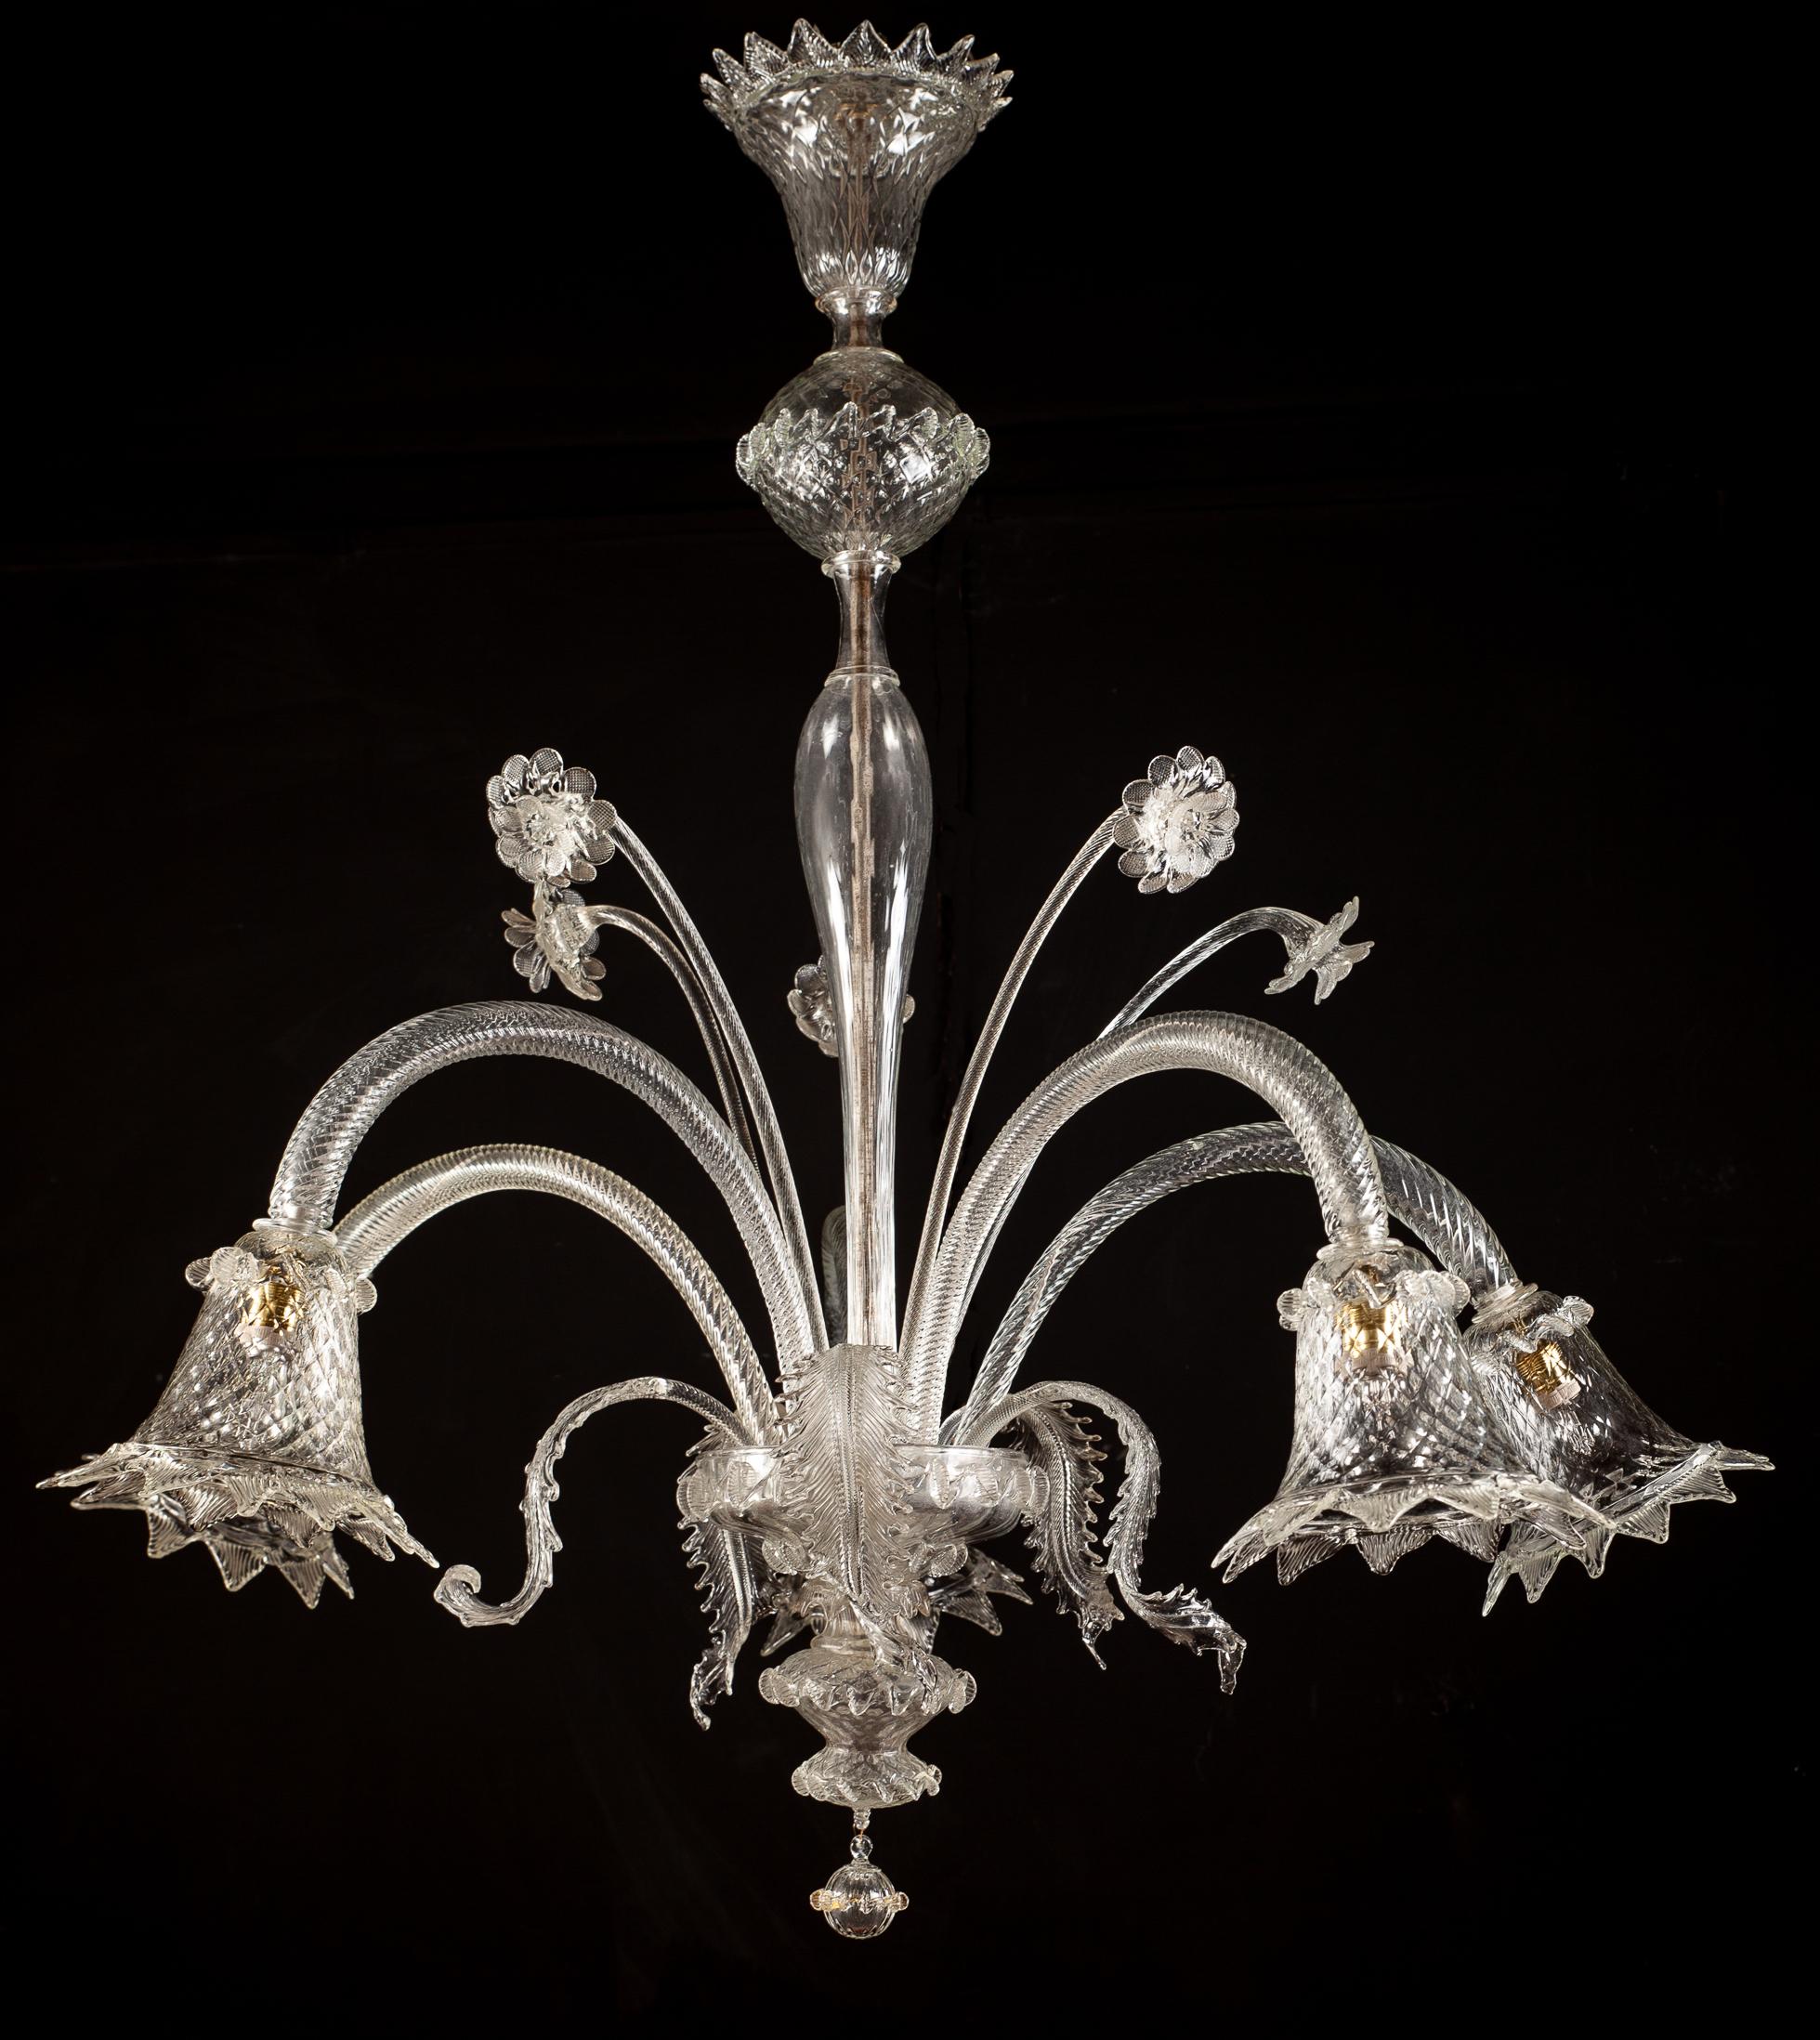 Elegant Murano five-light chandelier in transparent colors with sophisticated finishes . With a centered bulbous column issuing branches and delicately cut Murano glass flowers and leaves. Perfect vintage condition.
Five E27 light bulbs.